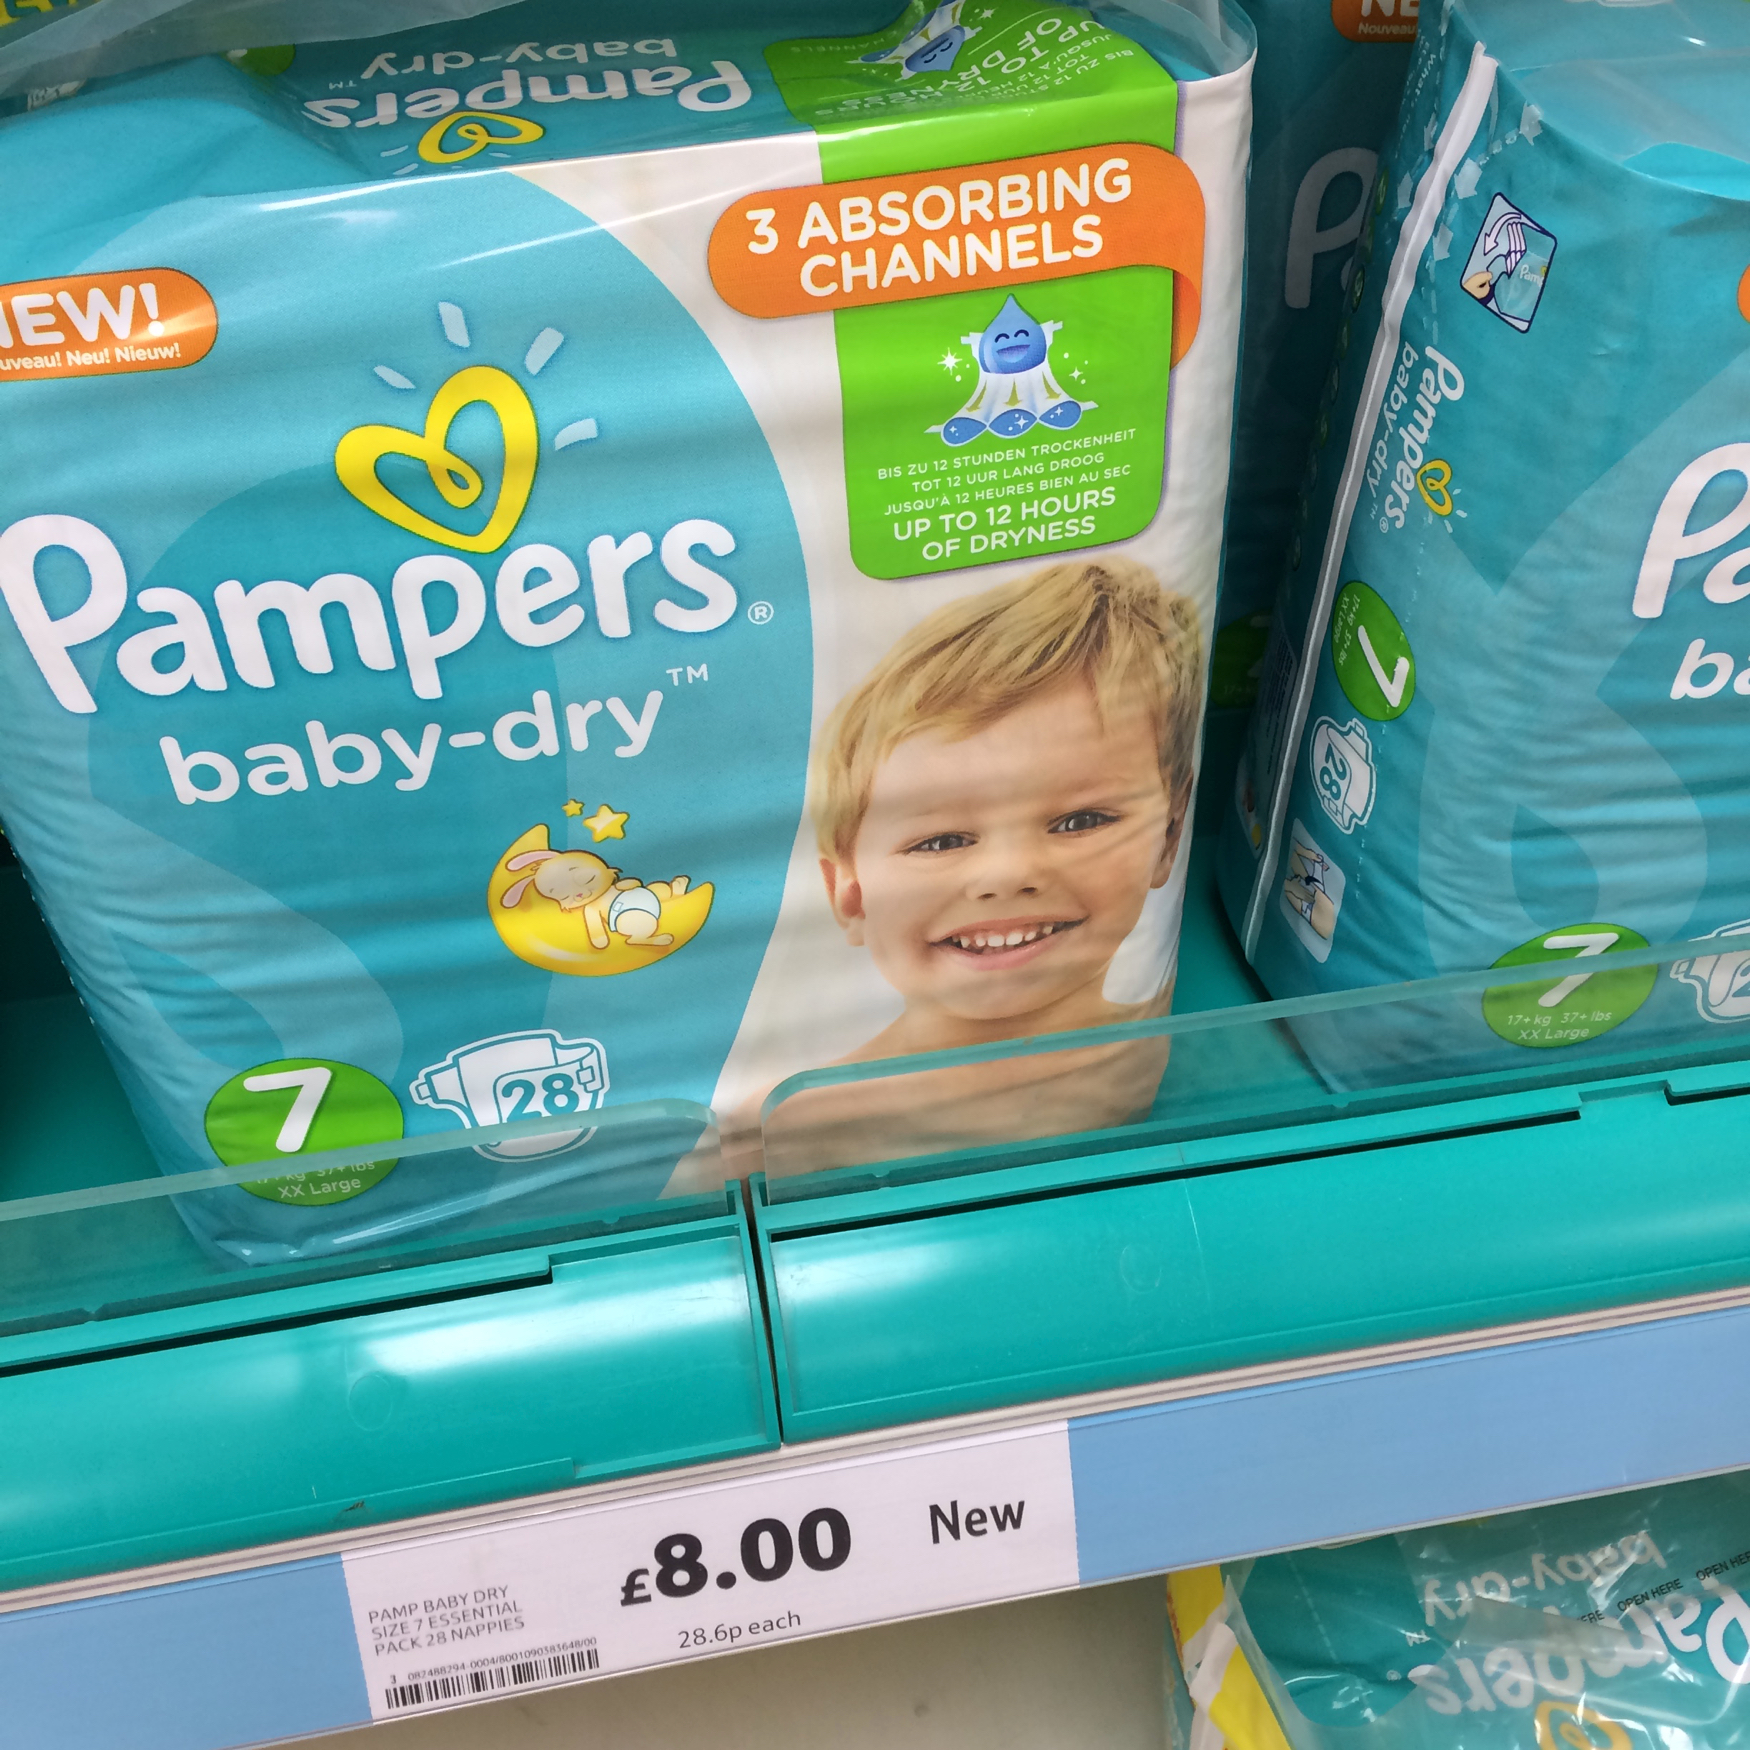 Pampers new size 7 nappies on a shelf in Tesco